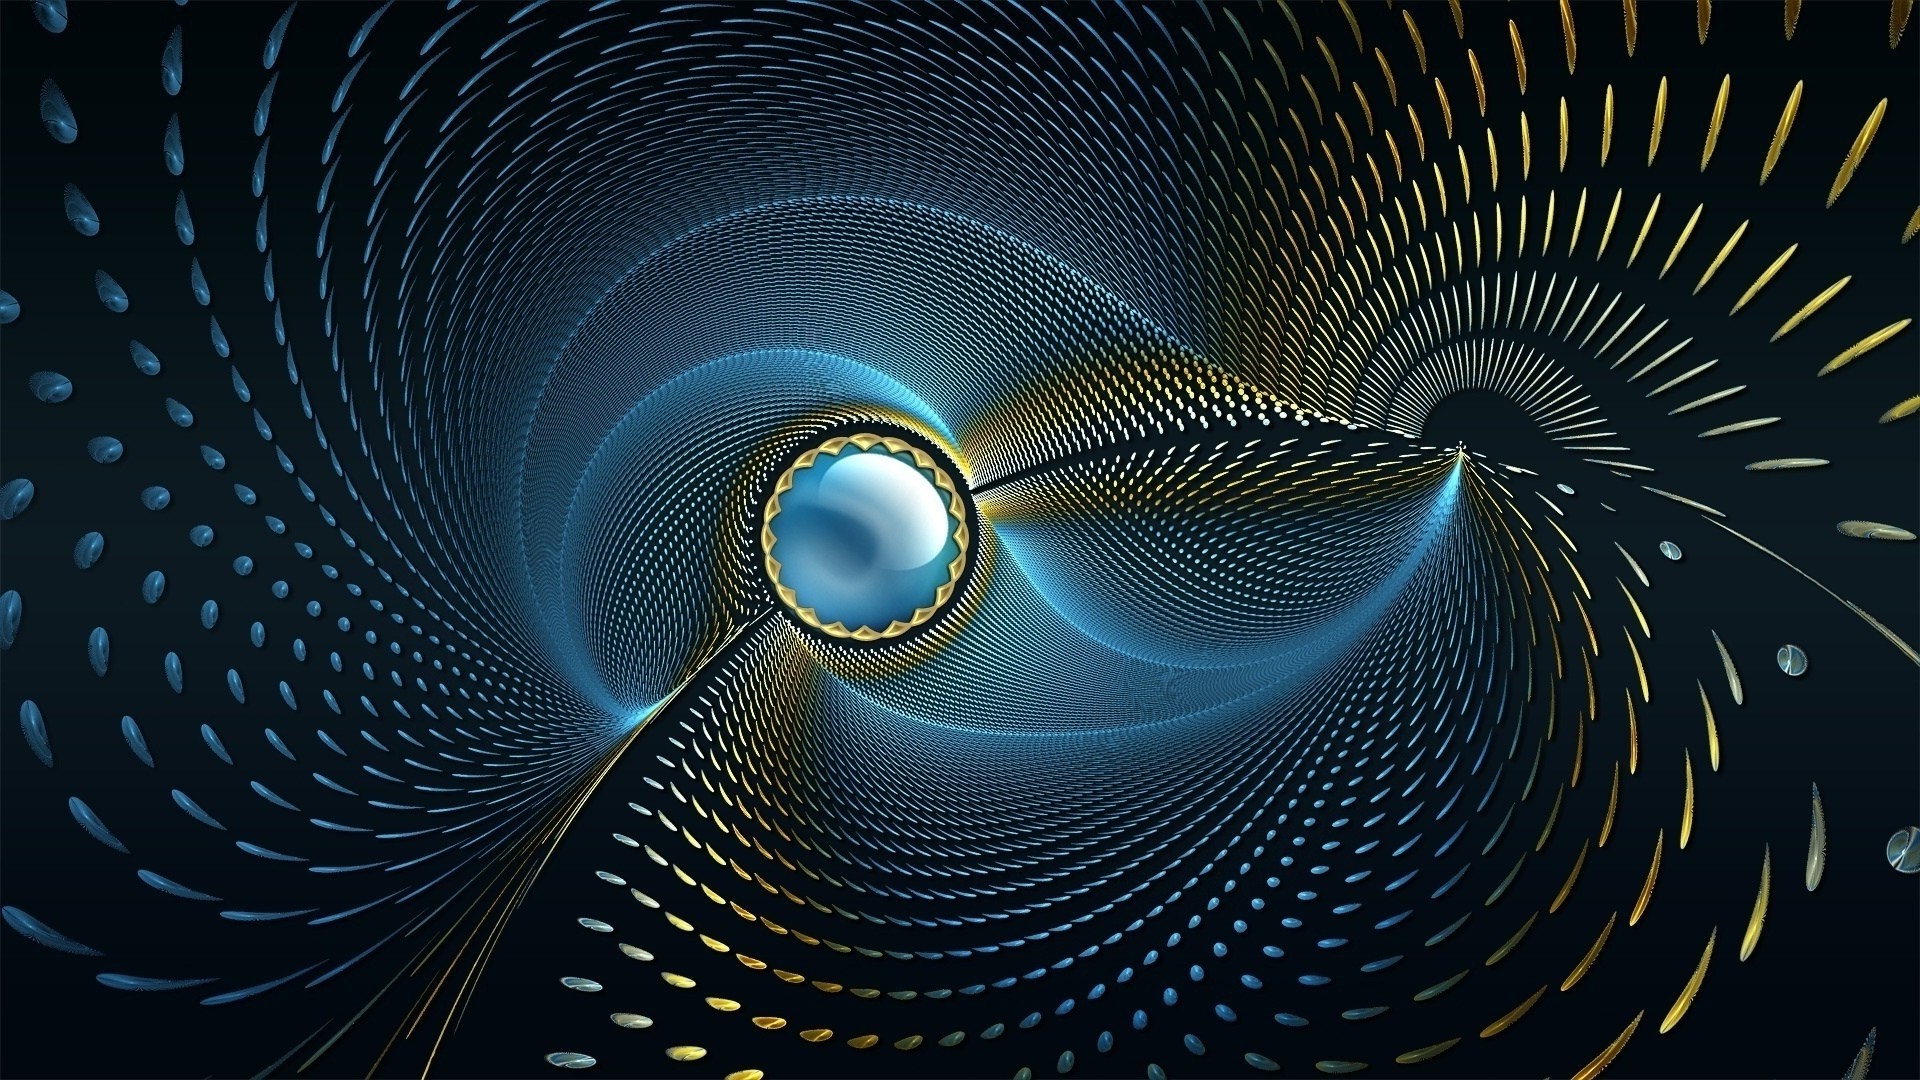 Digital art abstract circle cgi blue background spiral p k k hd wallpapers backgrounds free download rare gallery